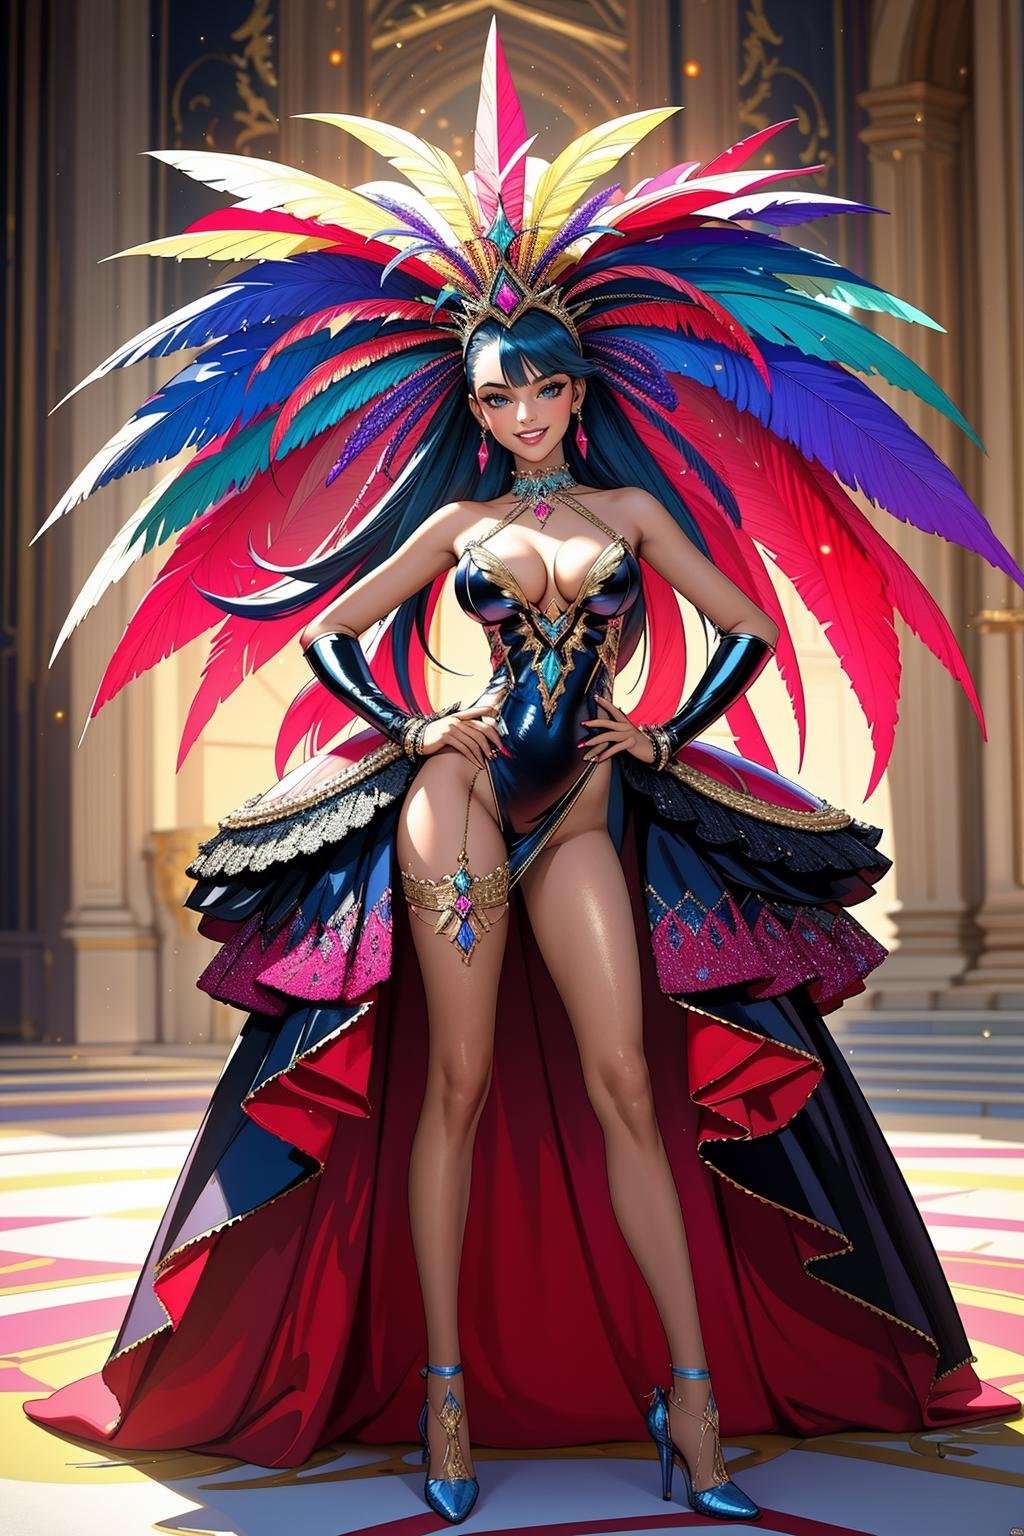 ((Masterpiece, best quality,edgQuality)), standing,posing for a picture,smiling,excited, Haute_Couture,edgCarnival, shiny dress, standing, full body, high heels,hands on hips, colorful,wearing edgCarnival Haute_Couture, designer dress <lora:edgLycorisCarnival:1>